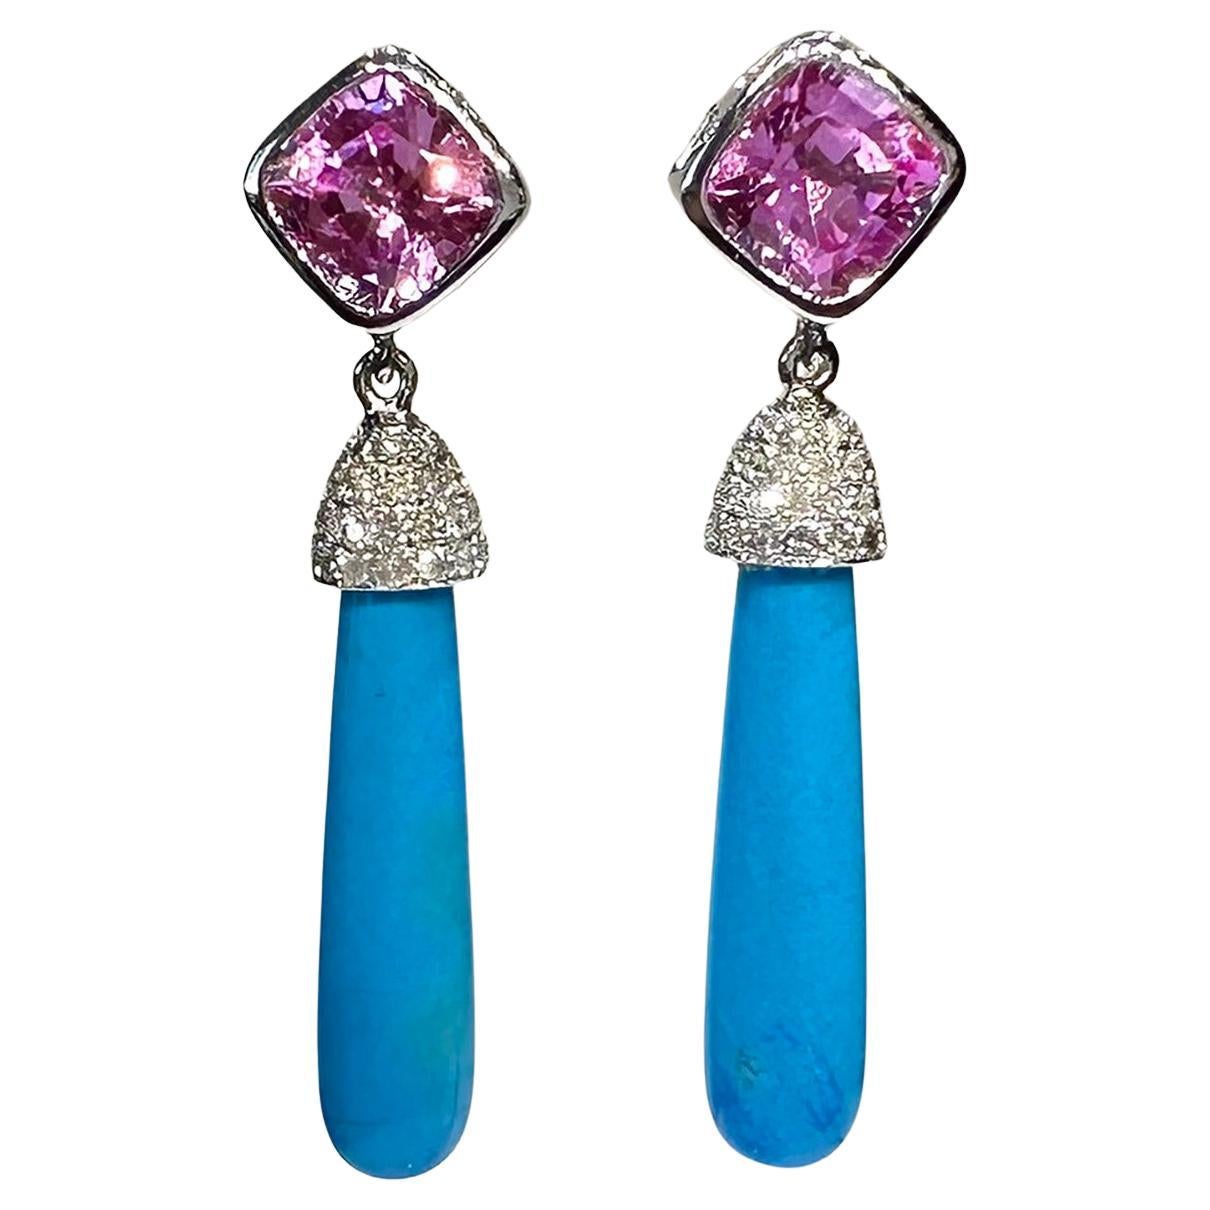 14kt White Gold Dangle Earrings with Pink & White Sapphires and Turquoise Drops